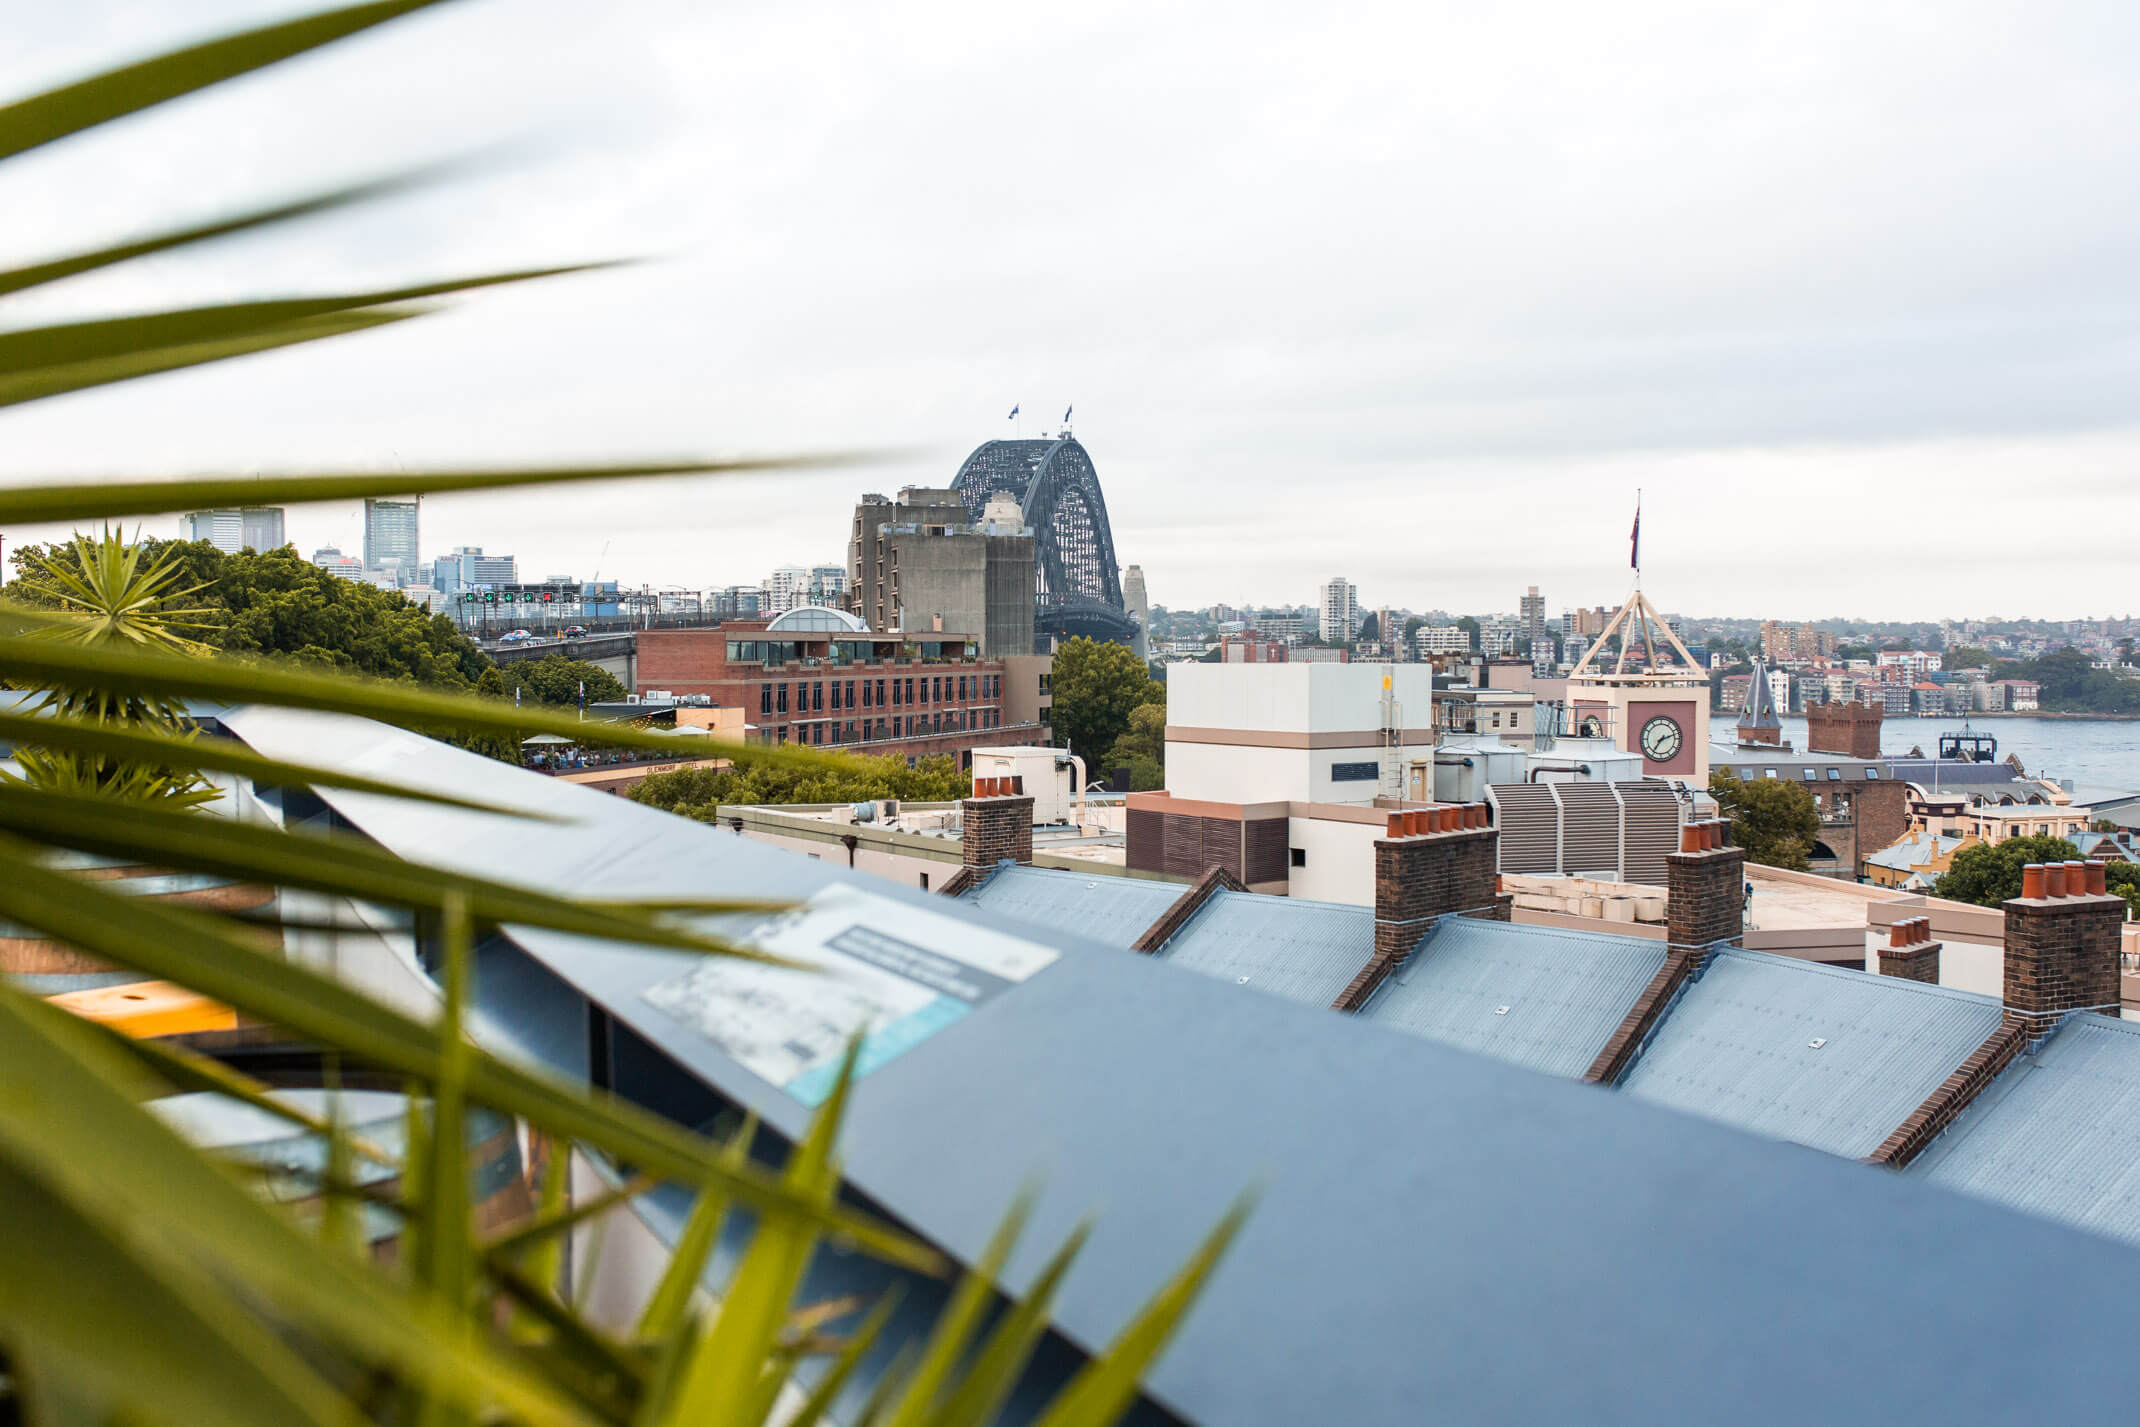 Hostel Guide: Where to stay in Sydney